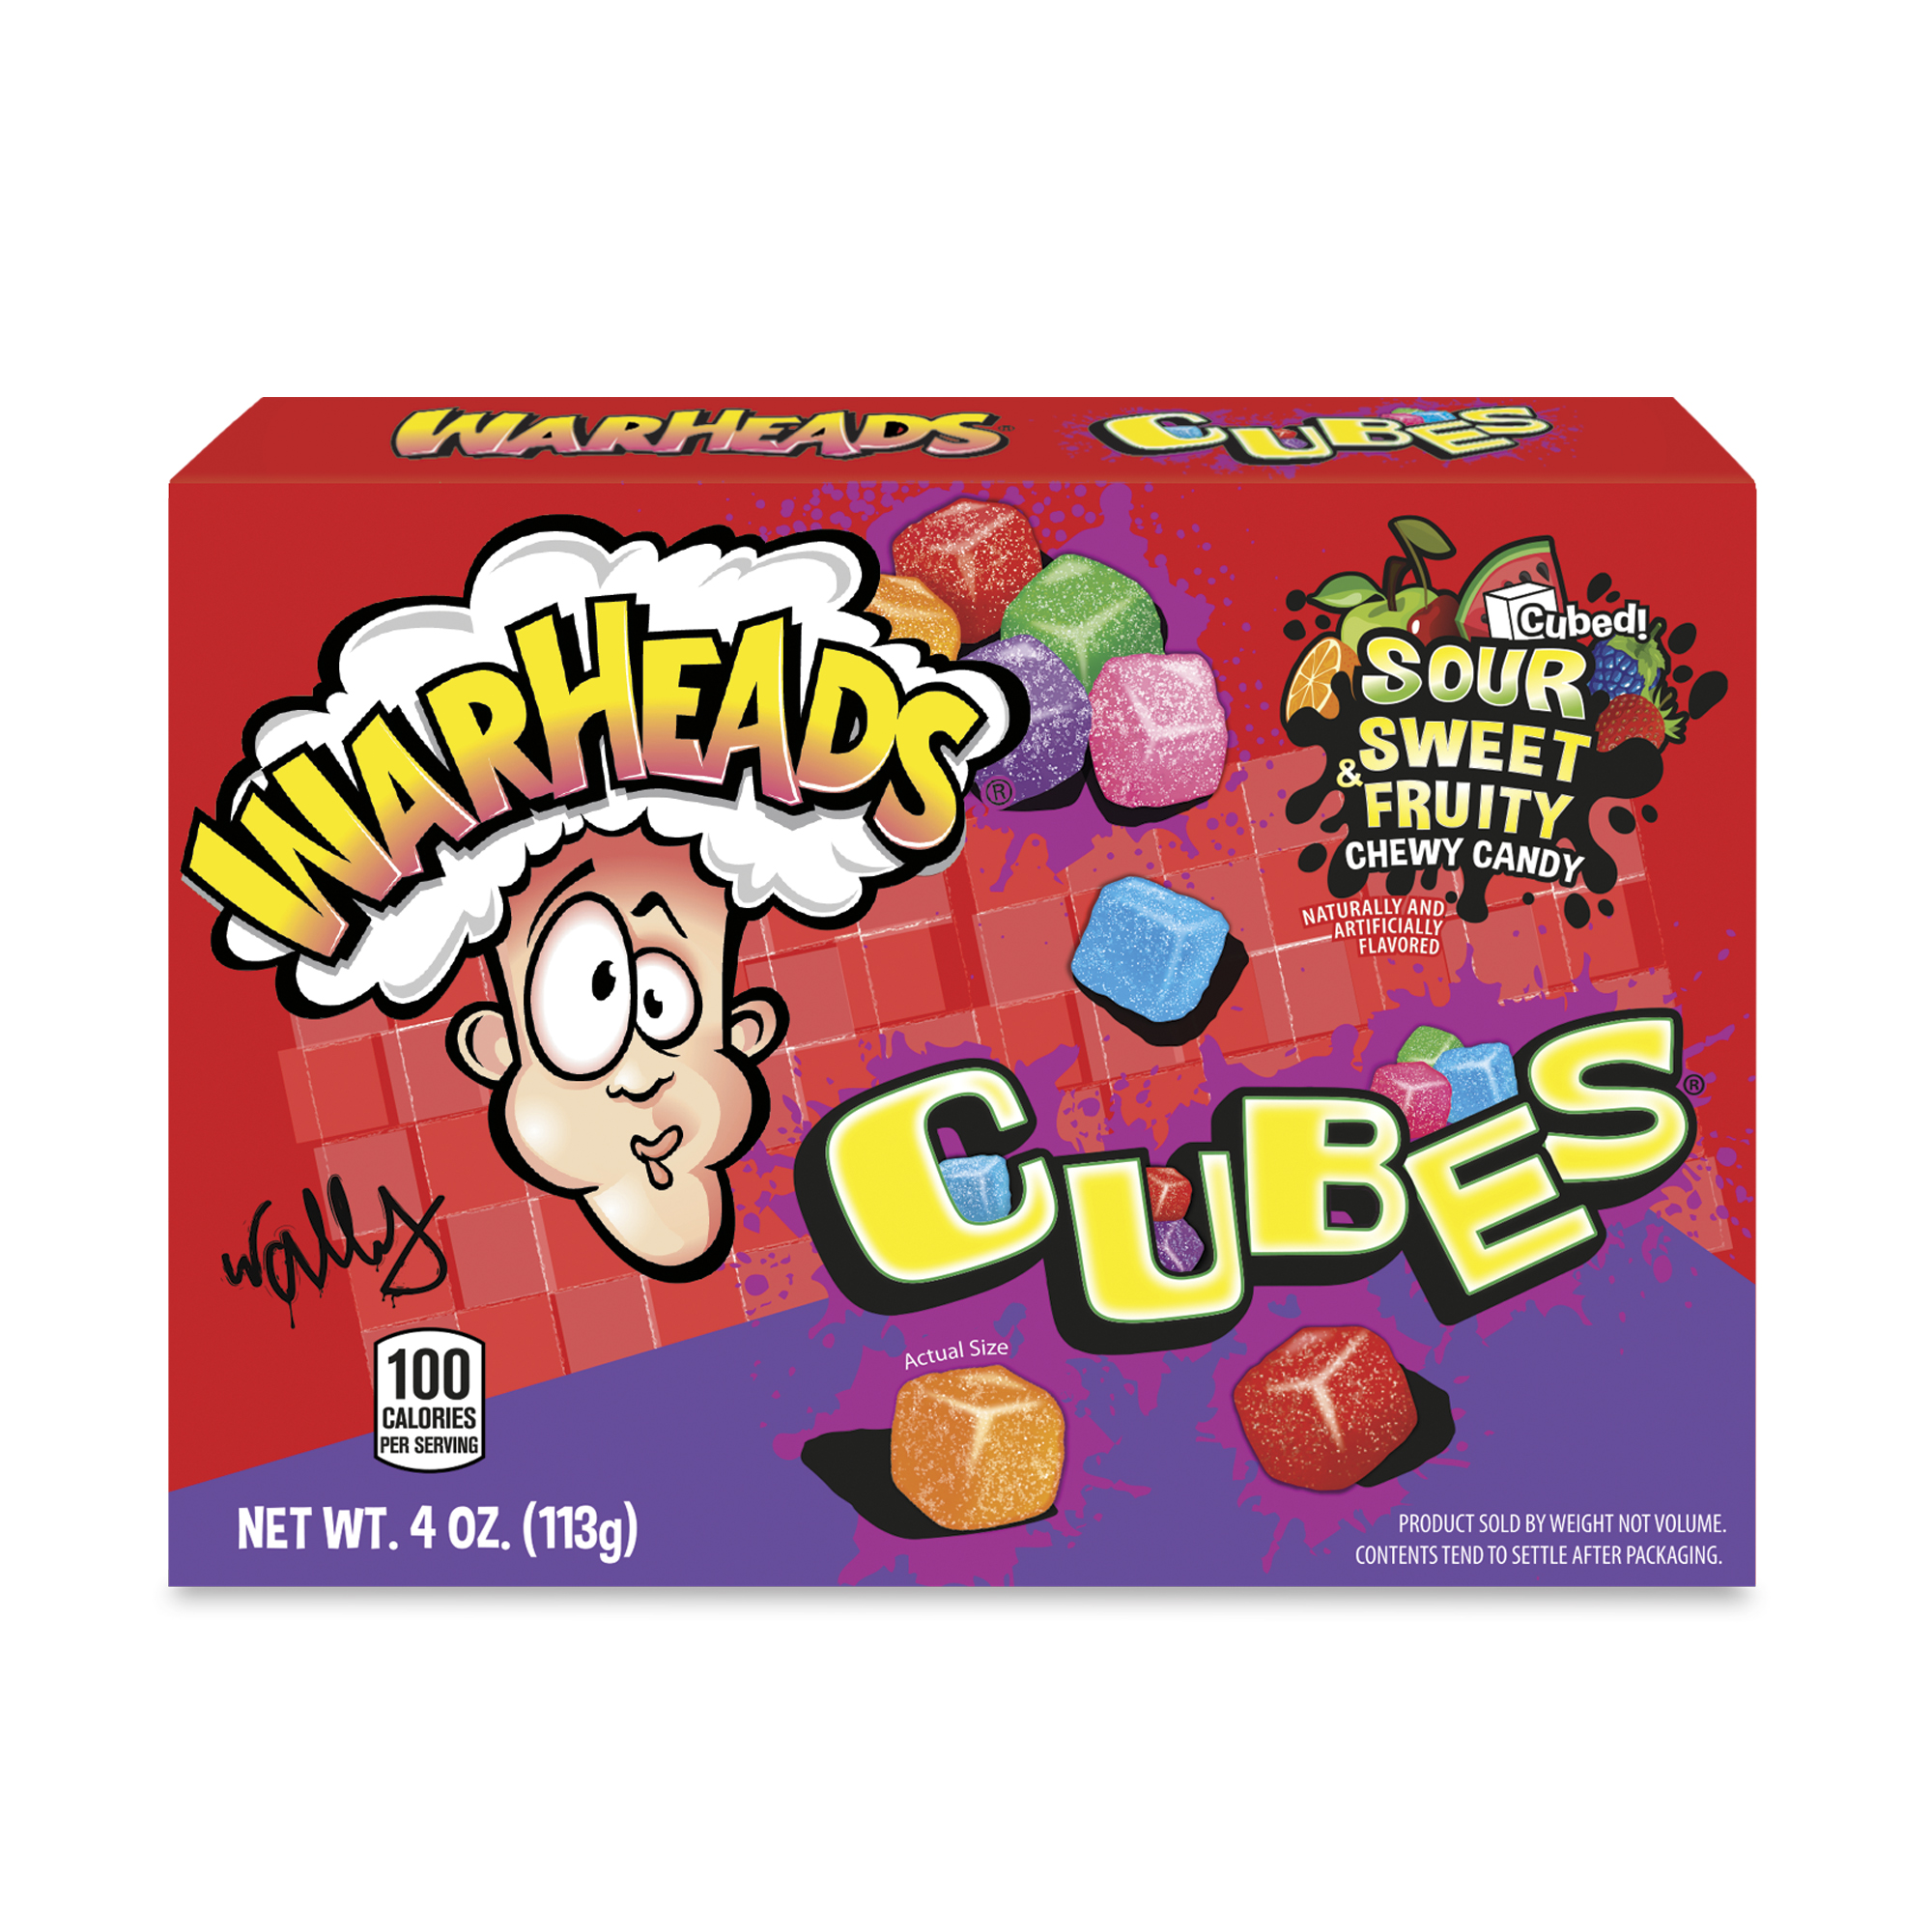 IMPACT - 4 OZ WARHEADS CHEWY CUBES BOX 12 CT(S)